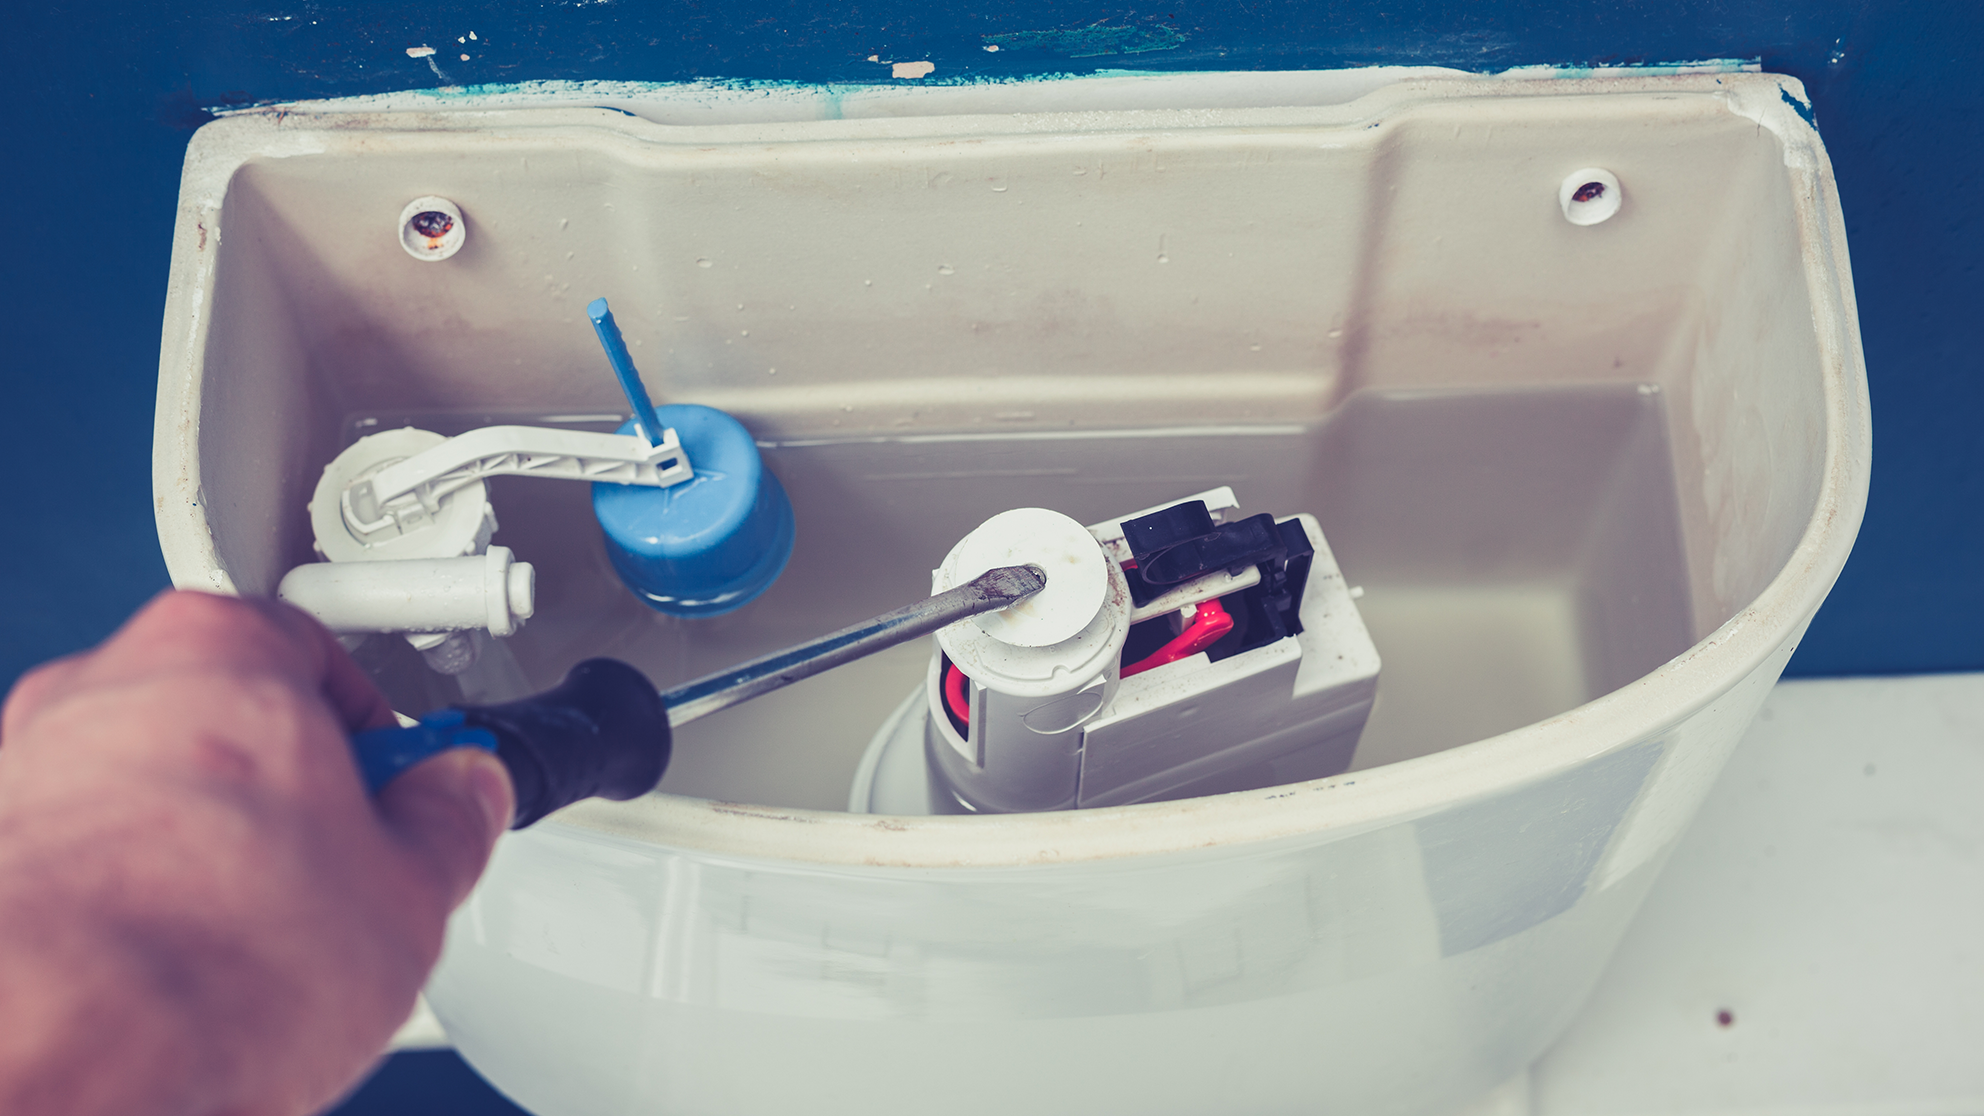 How to Fix a Leaky Toilet